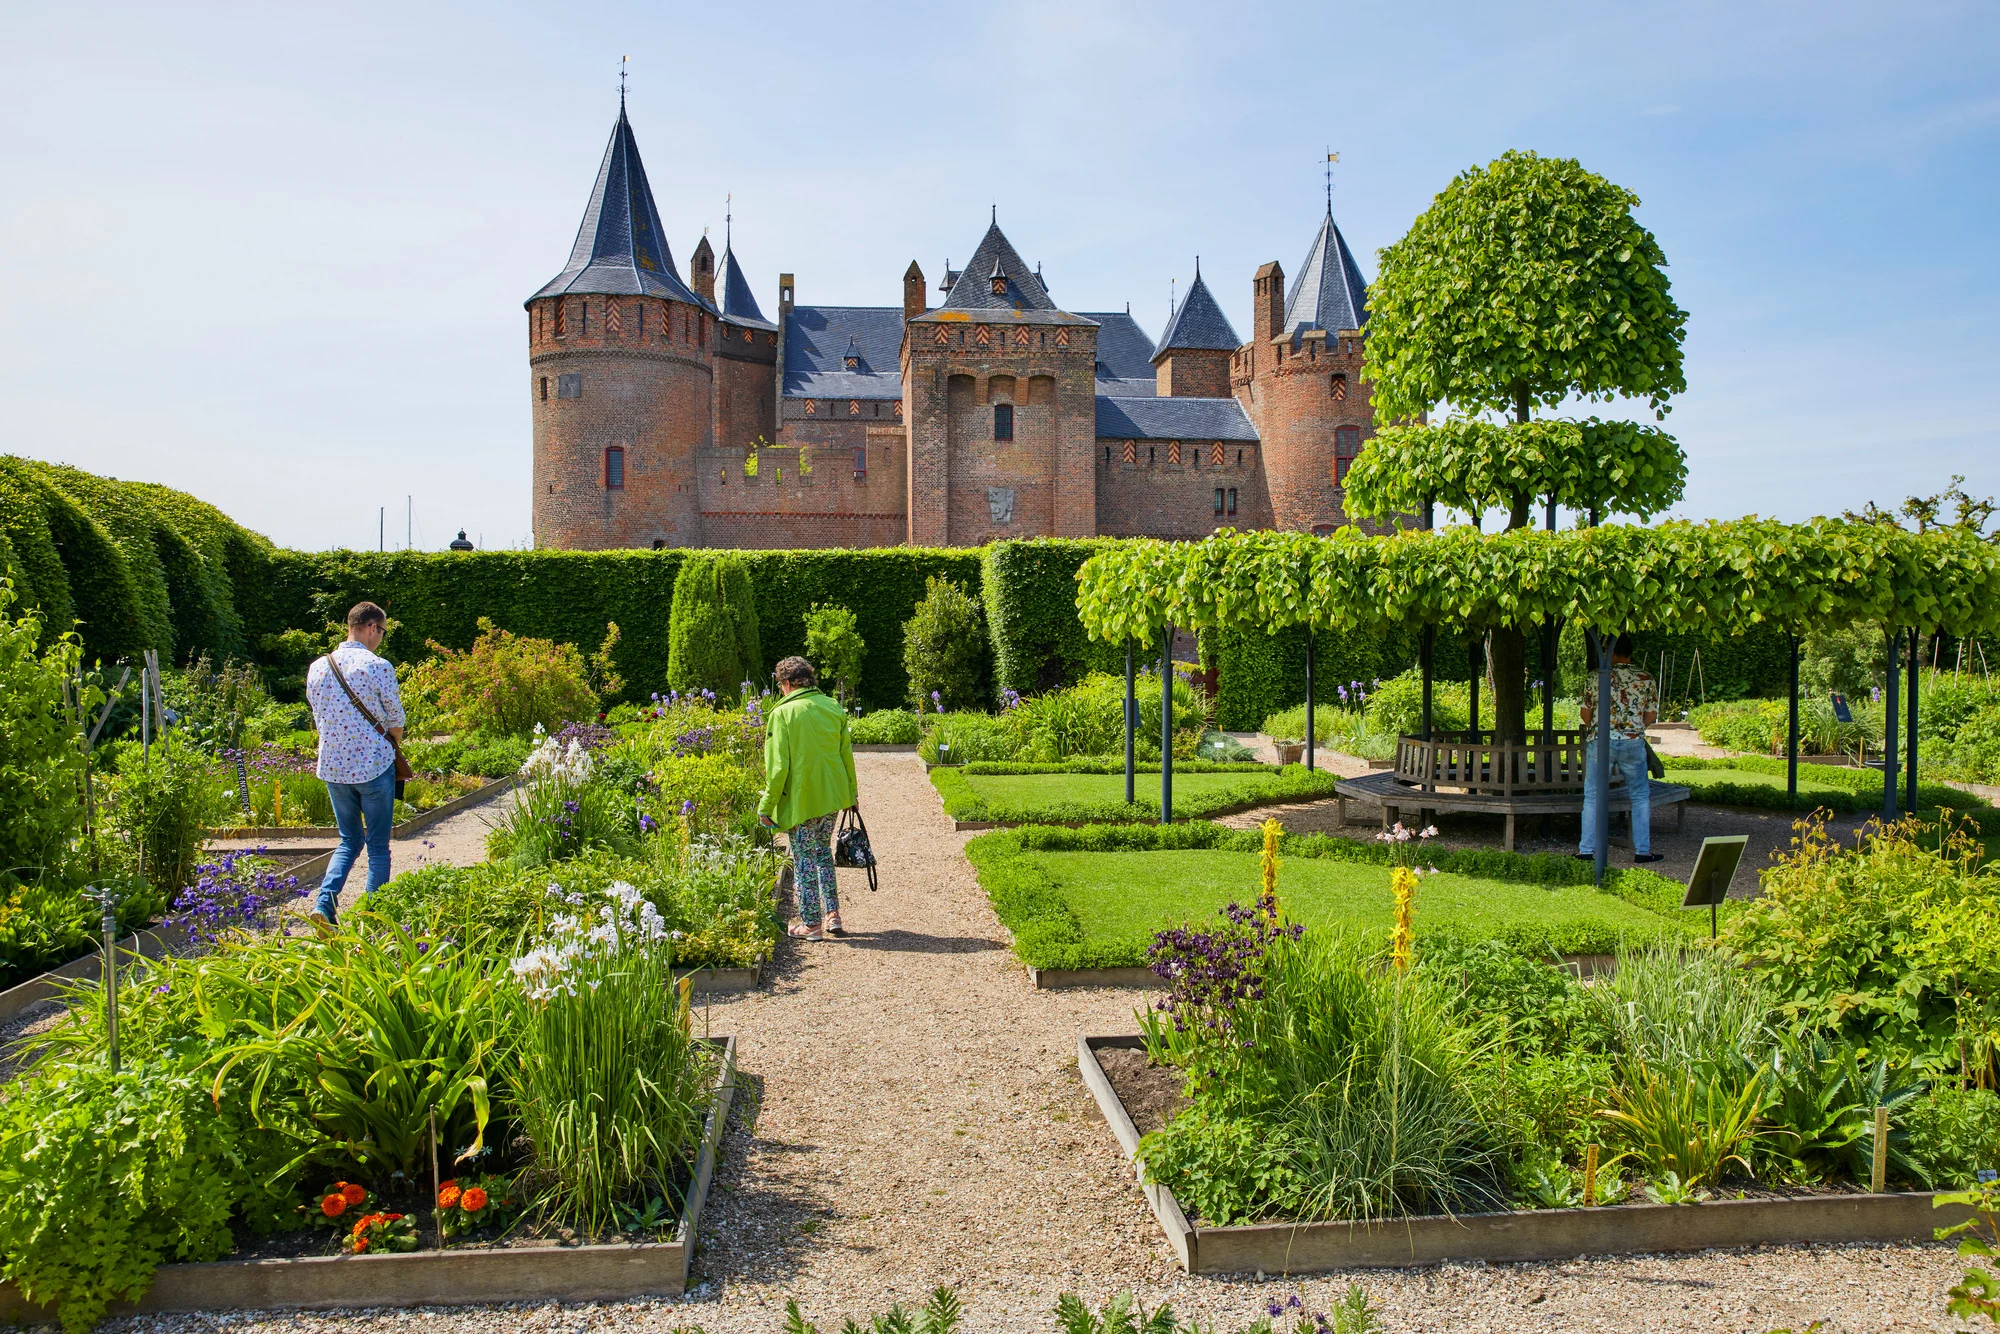 The,medieval,castle,'muiderslot',('slot',means,castle),from,the,year